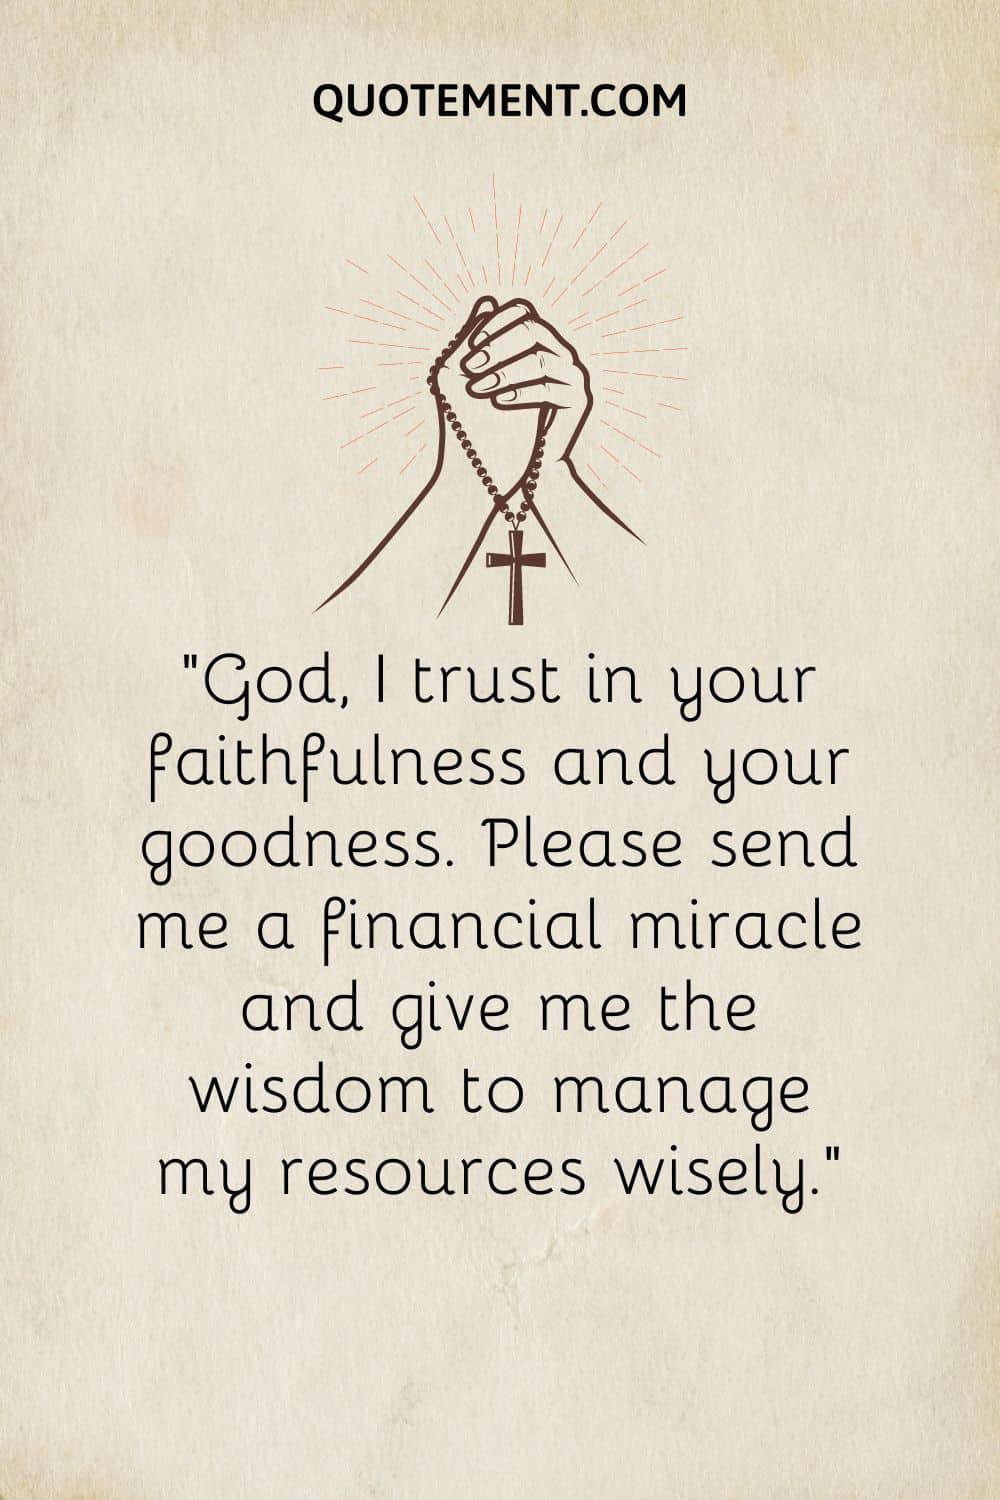 God, I trust in your faithfulness and your goodness